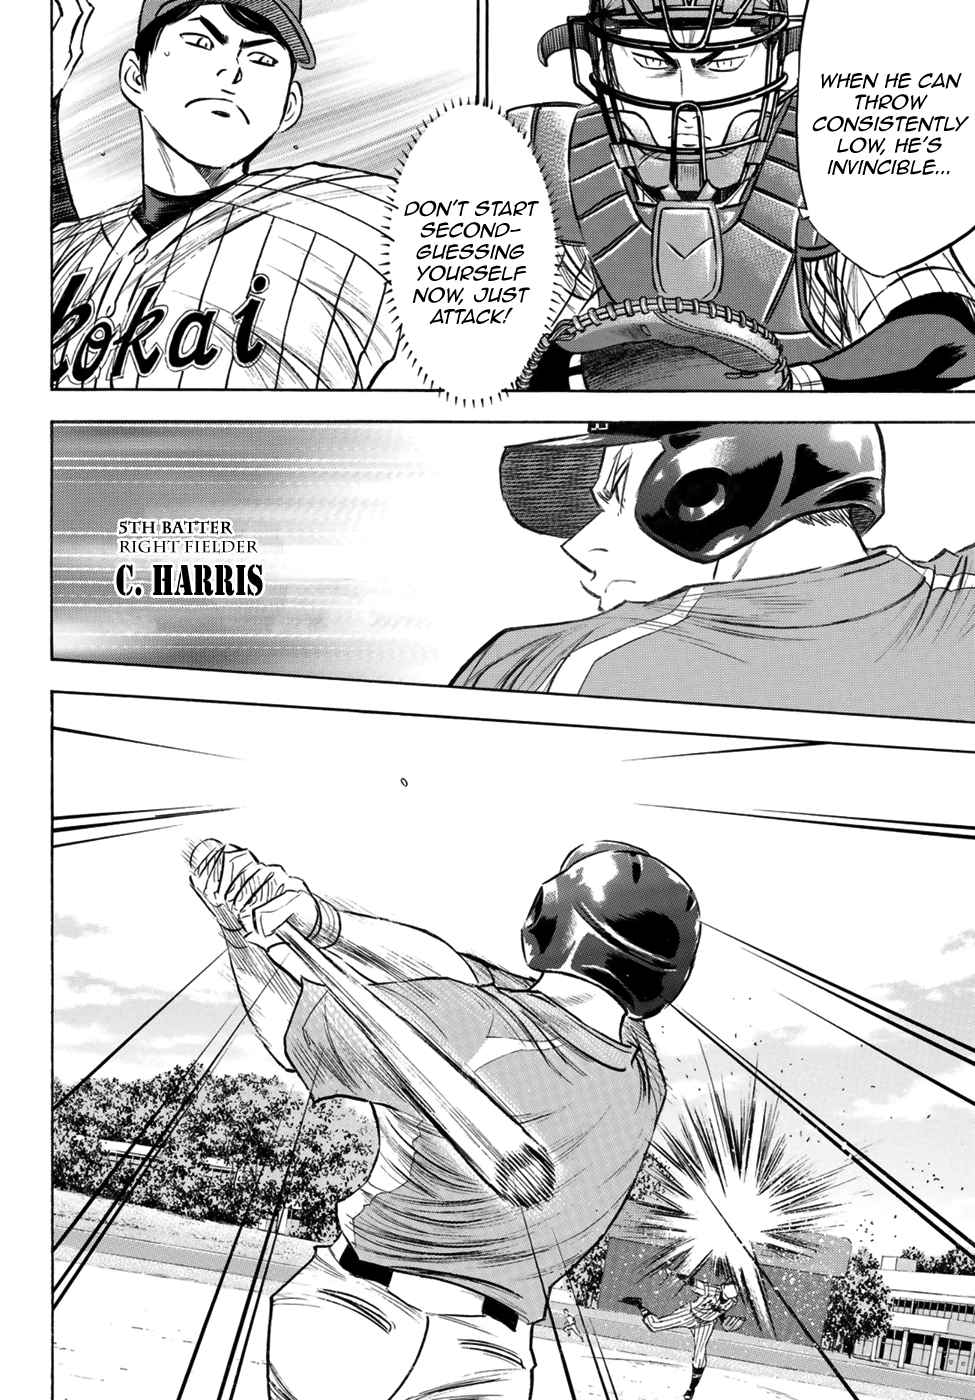 Diamond no Ace Act II Ch. 105 Because He's Awesome